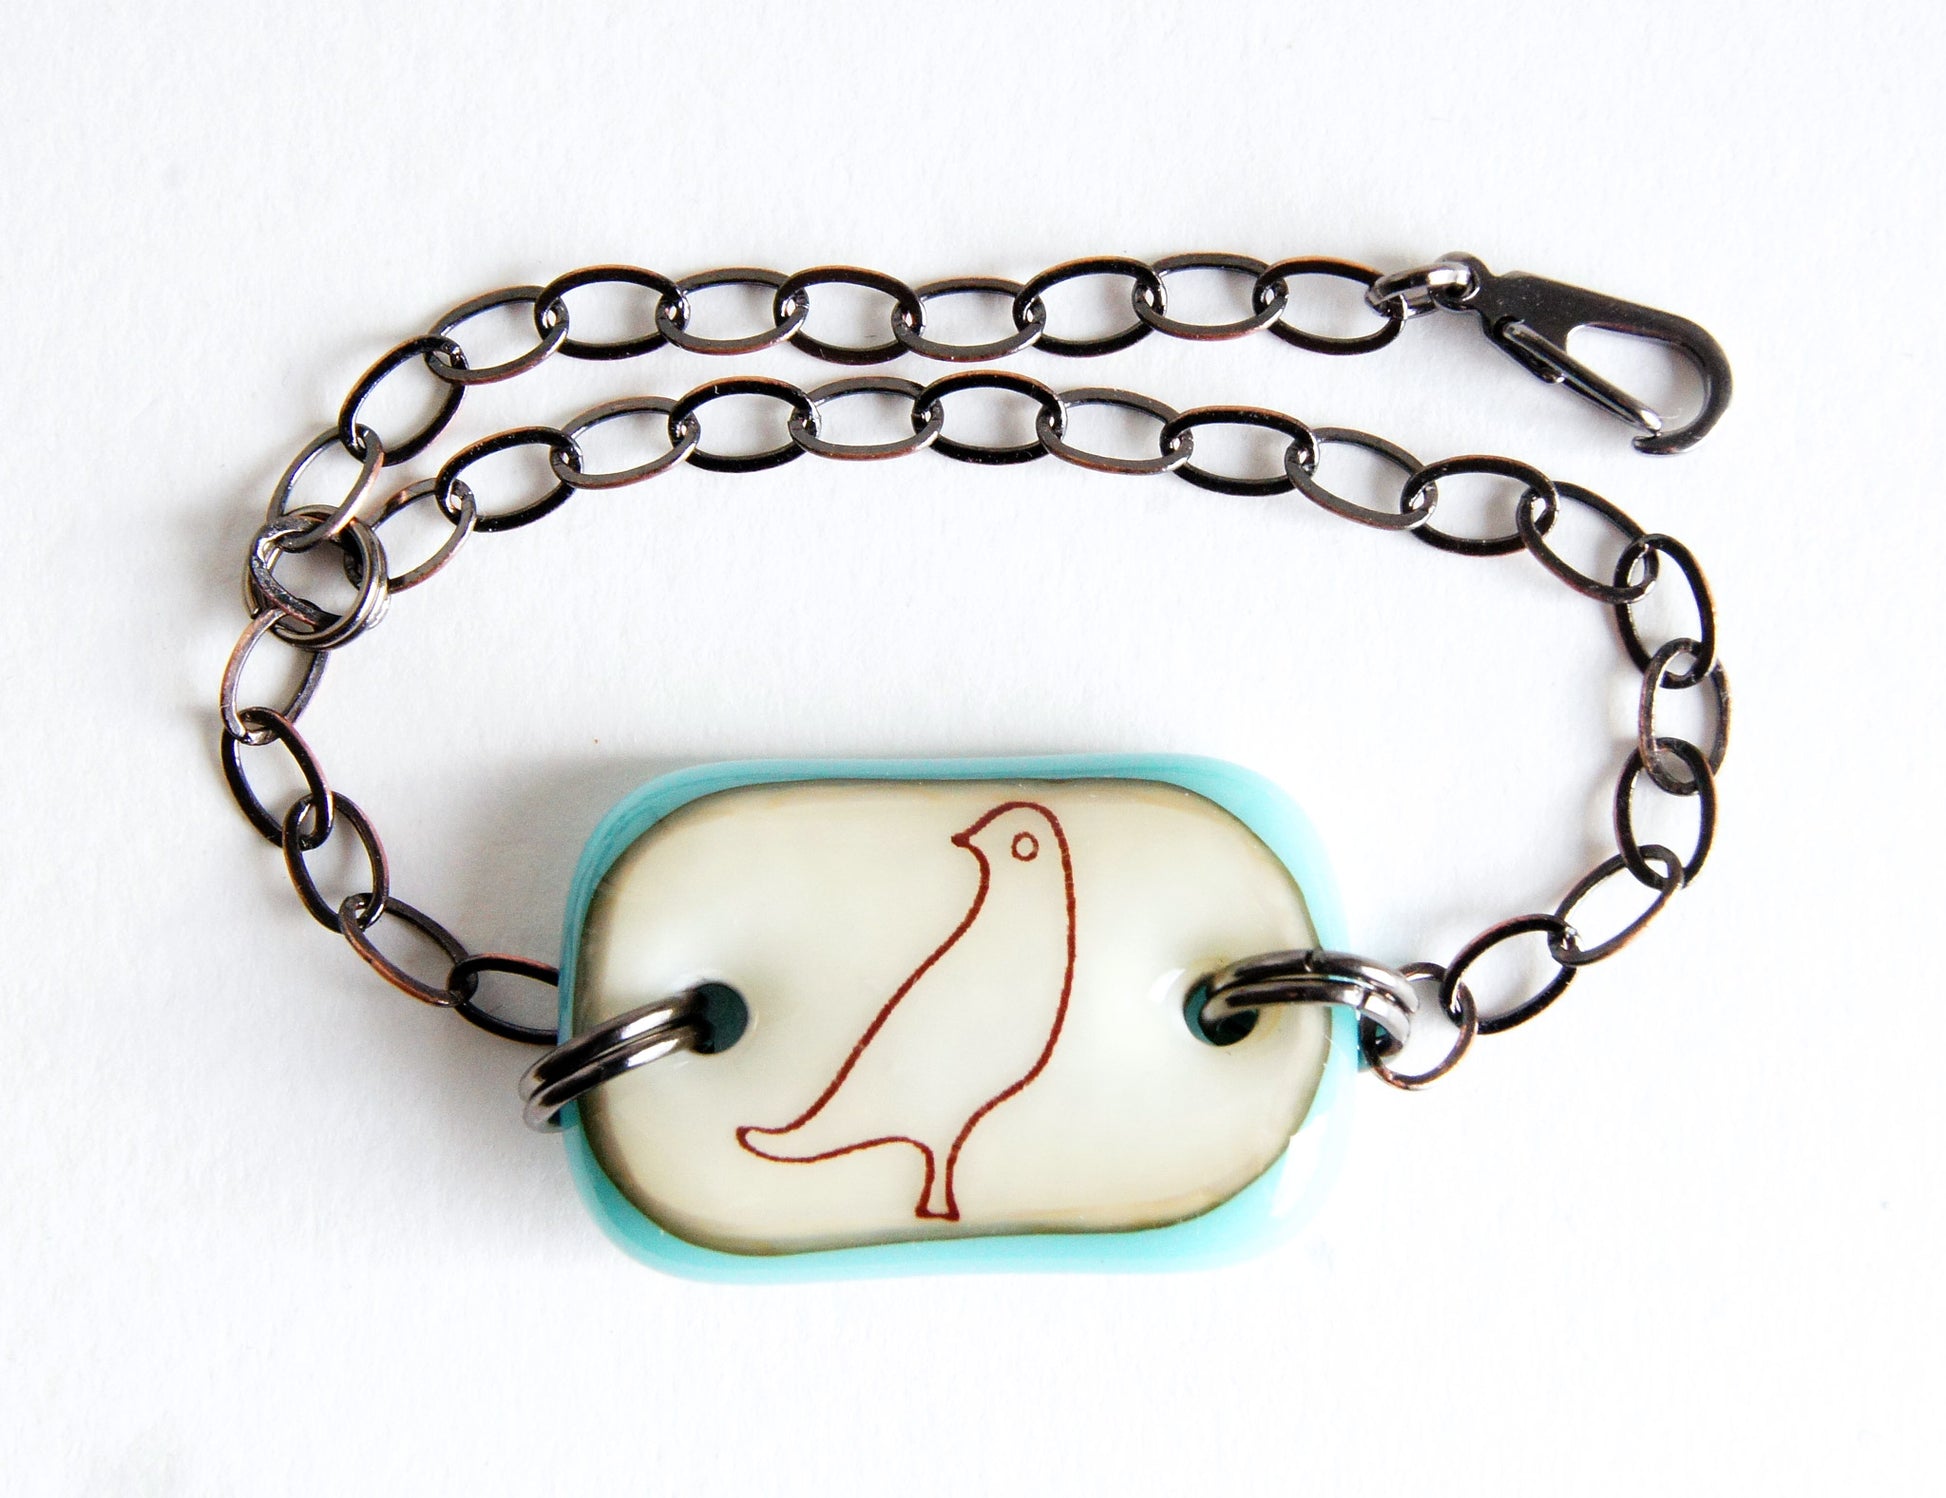 A handmade bird lover bronze chain bracelet with a fused glass dove focal bead.